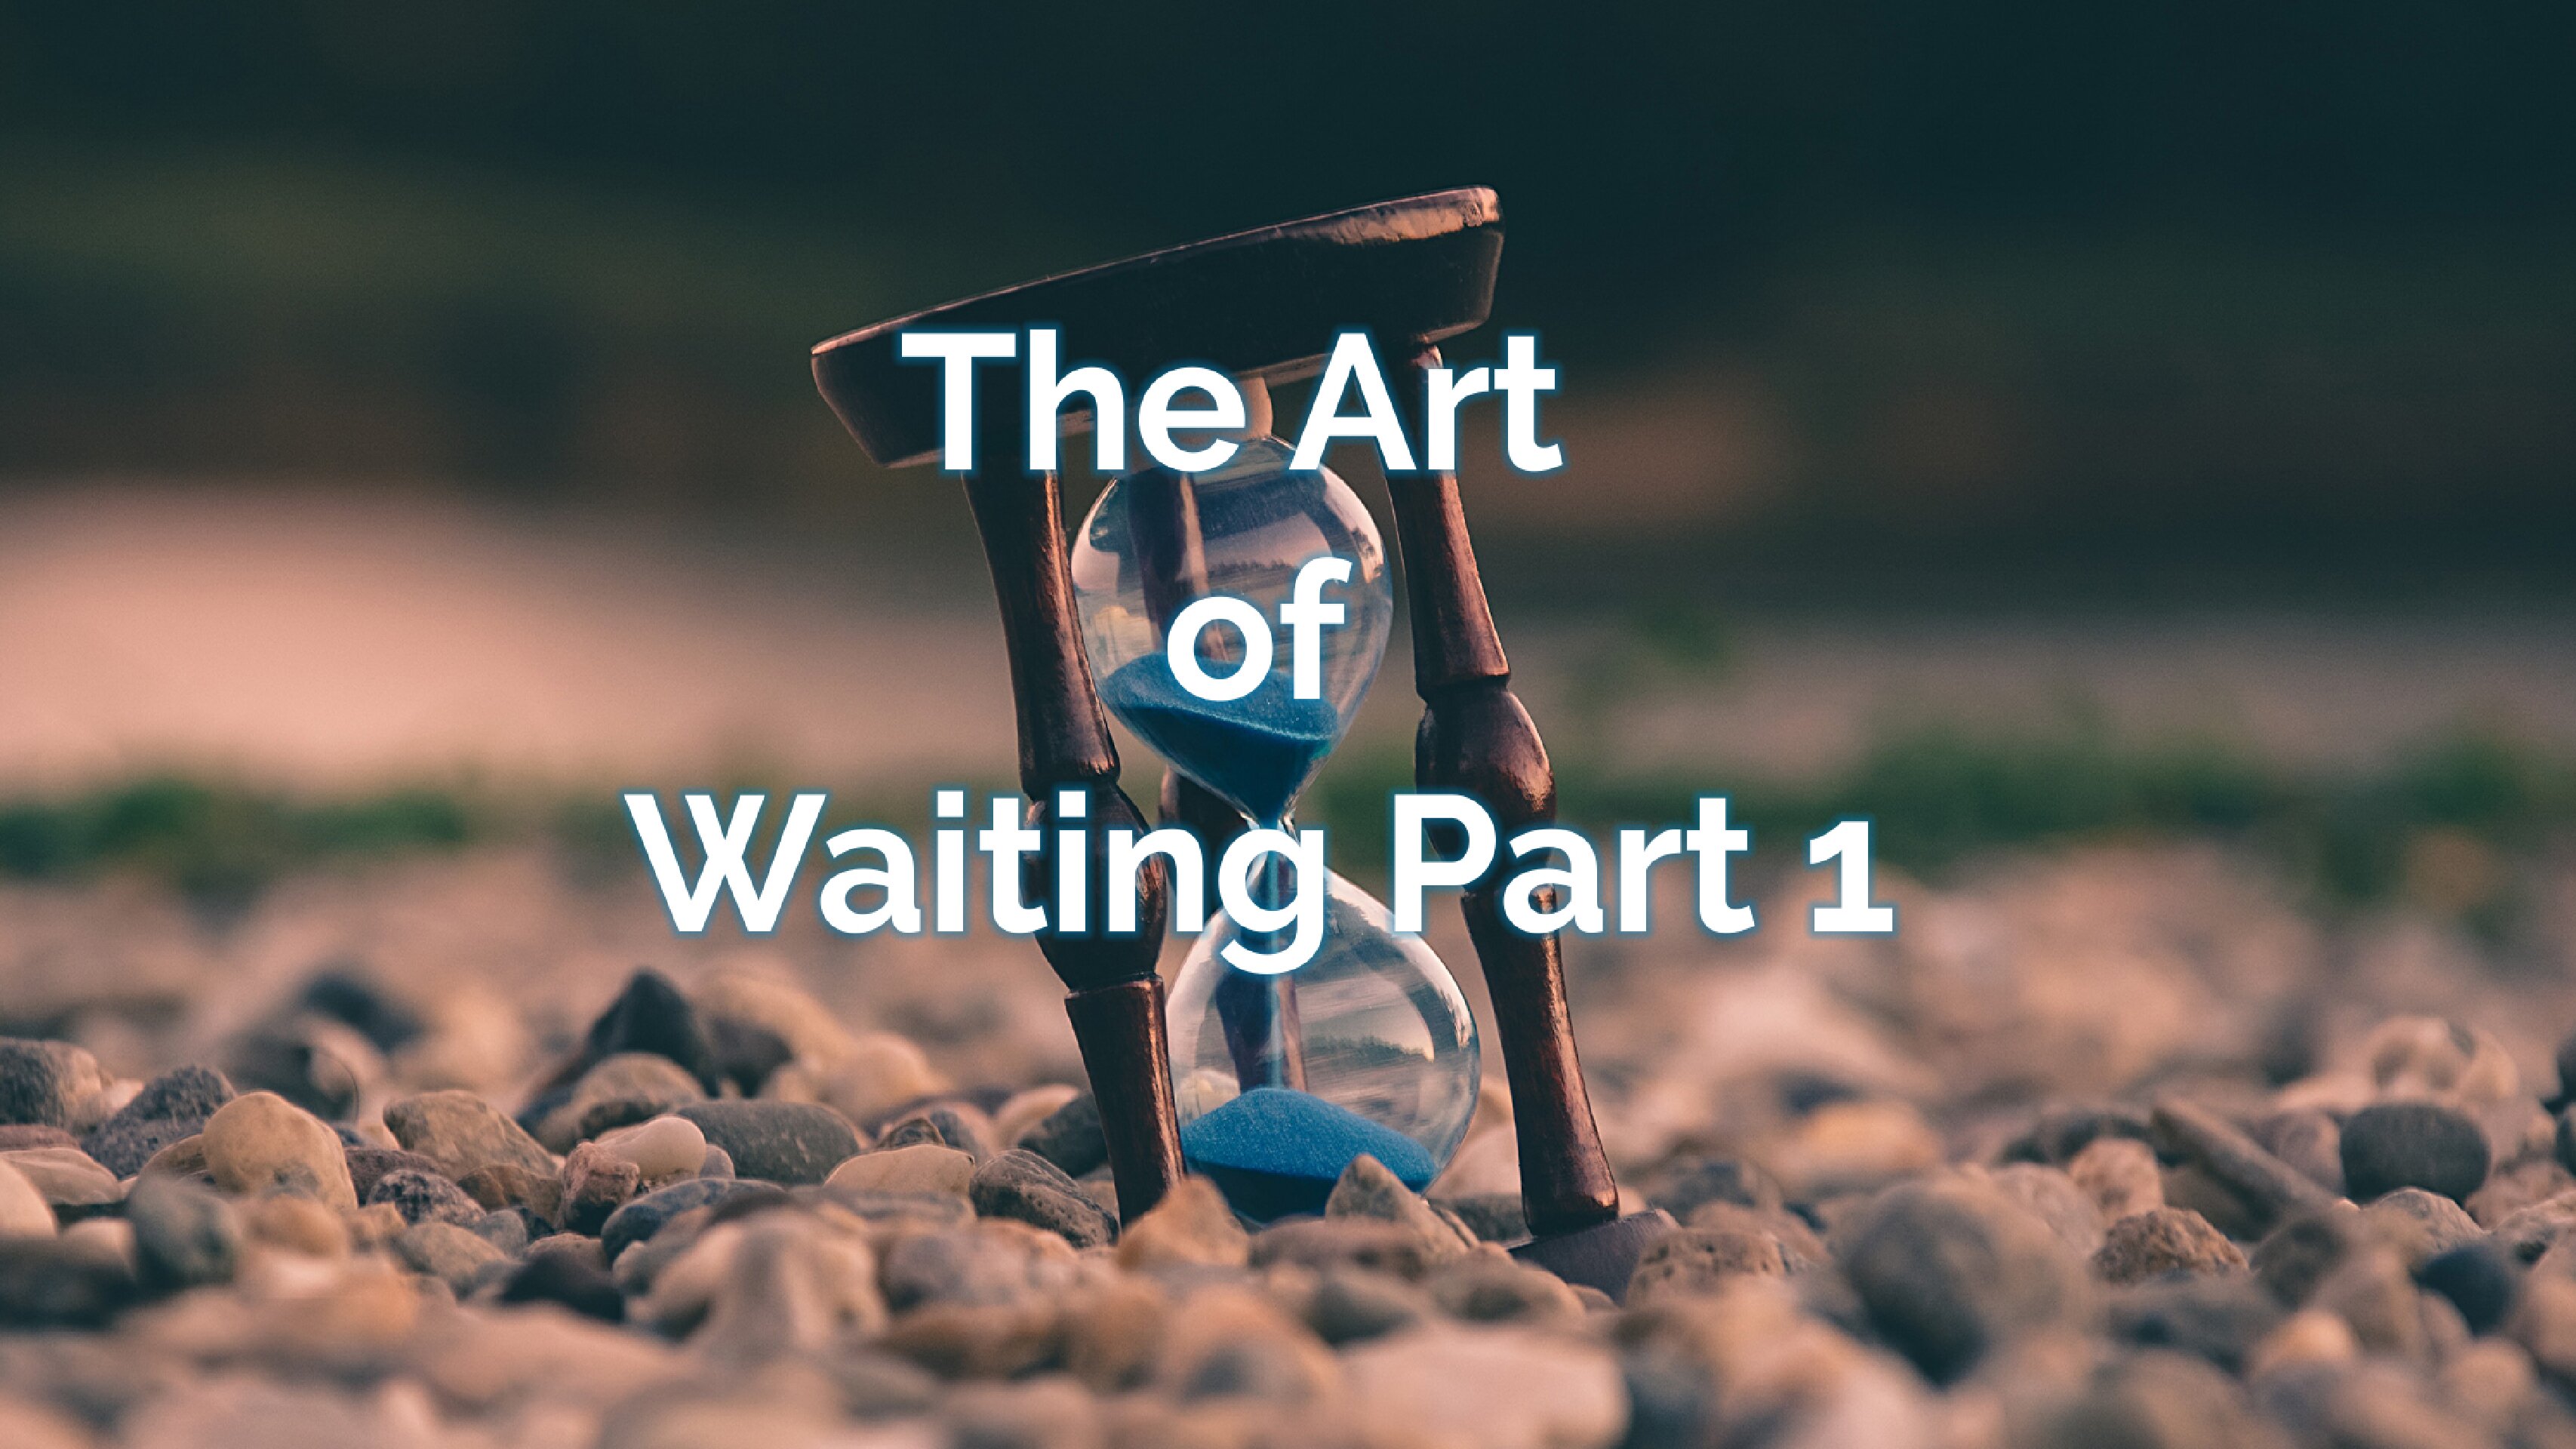 The Art of Waiting Part 1